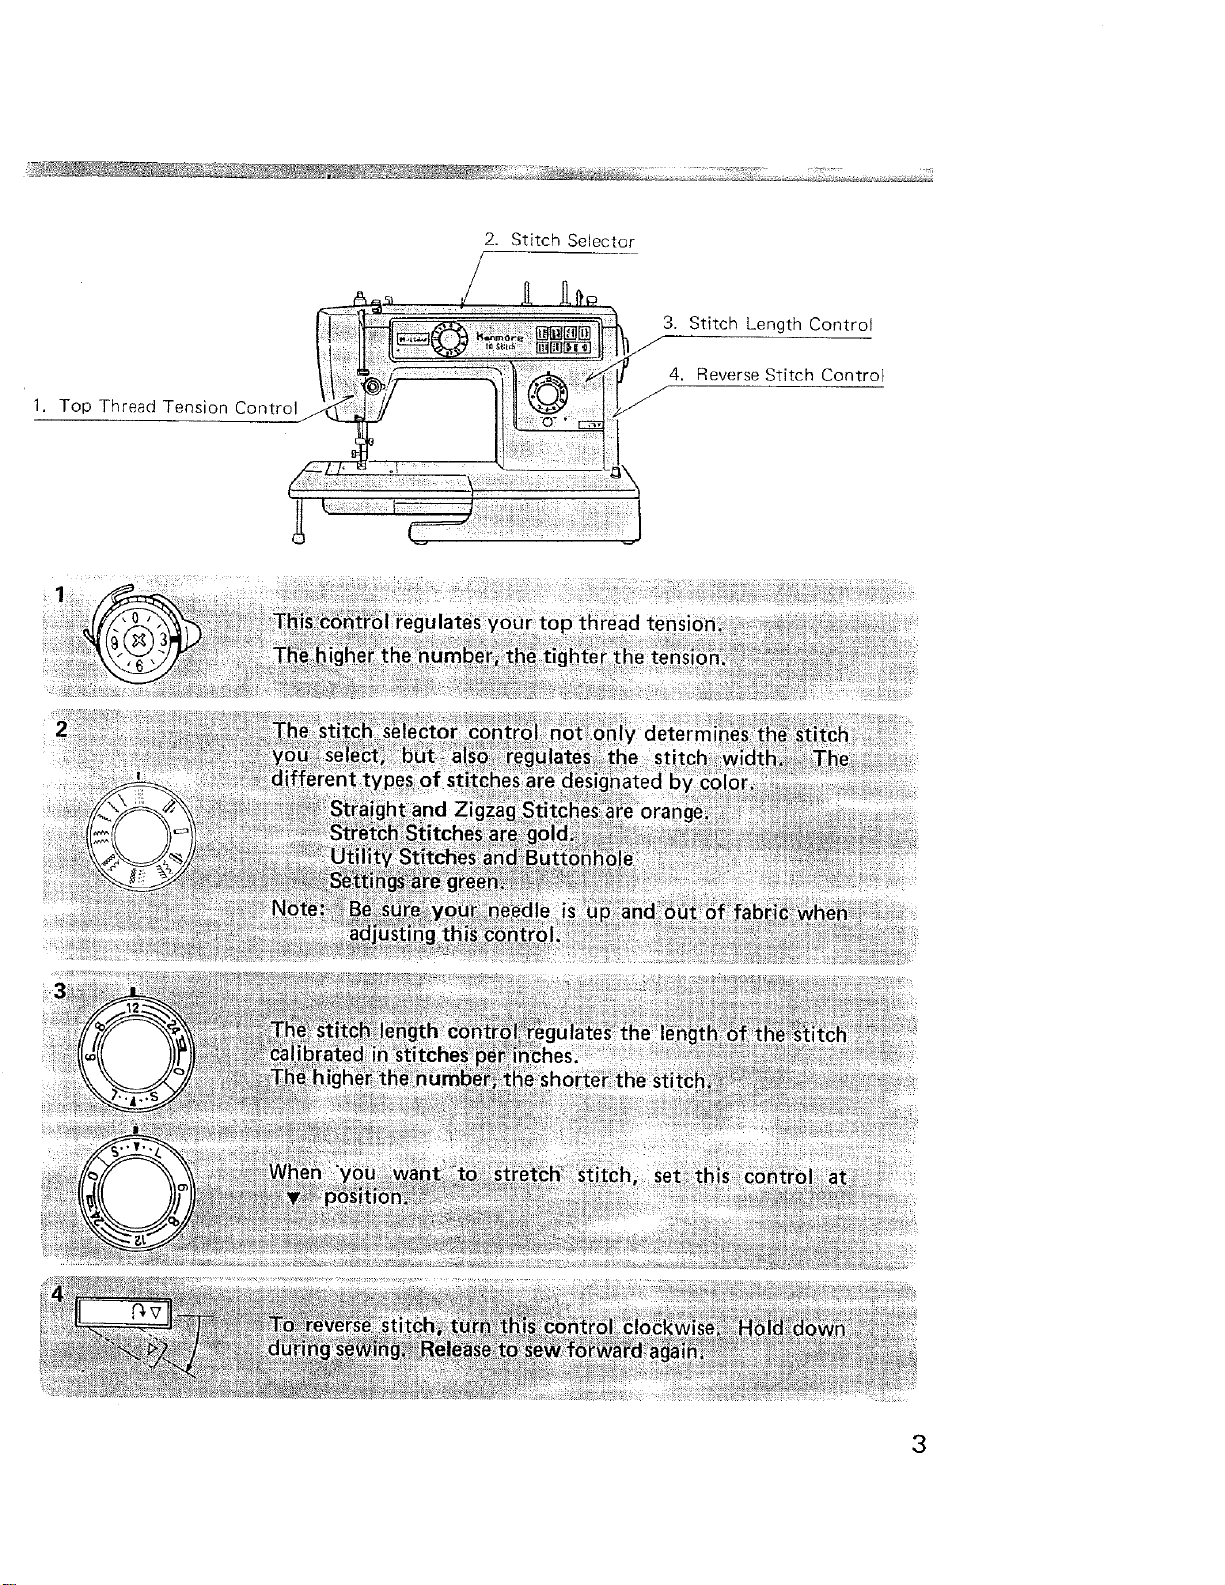 Selecting Needle And Fabric - Kenmore 385.16765 Owner's Manual